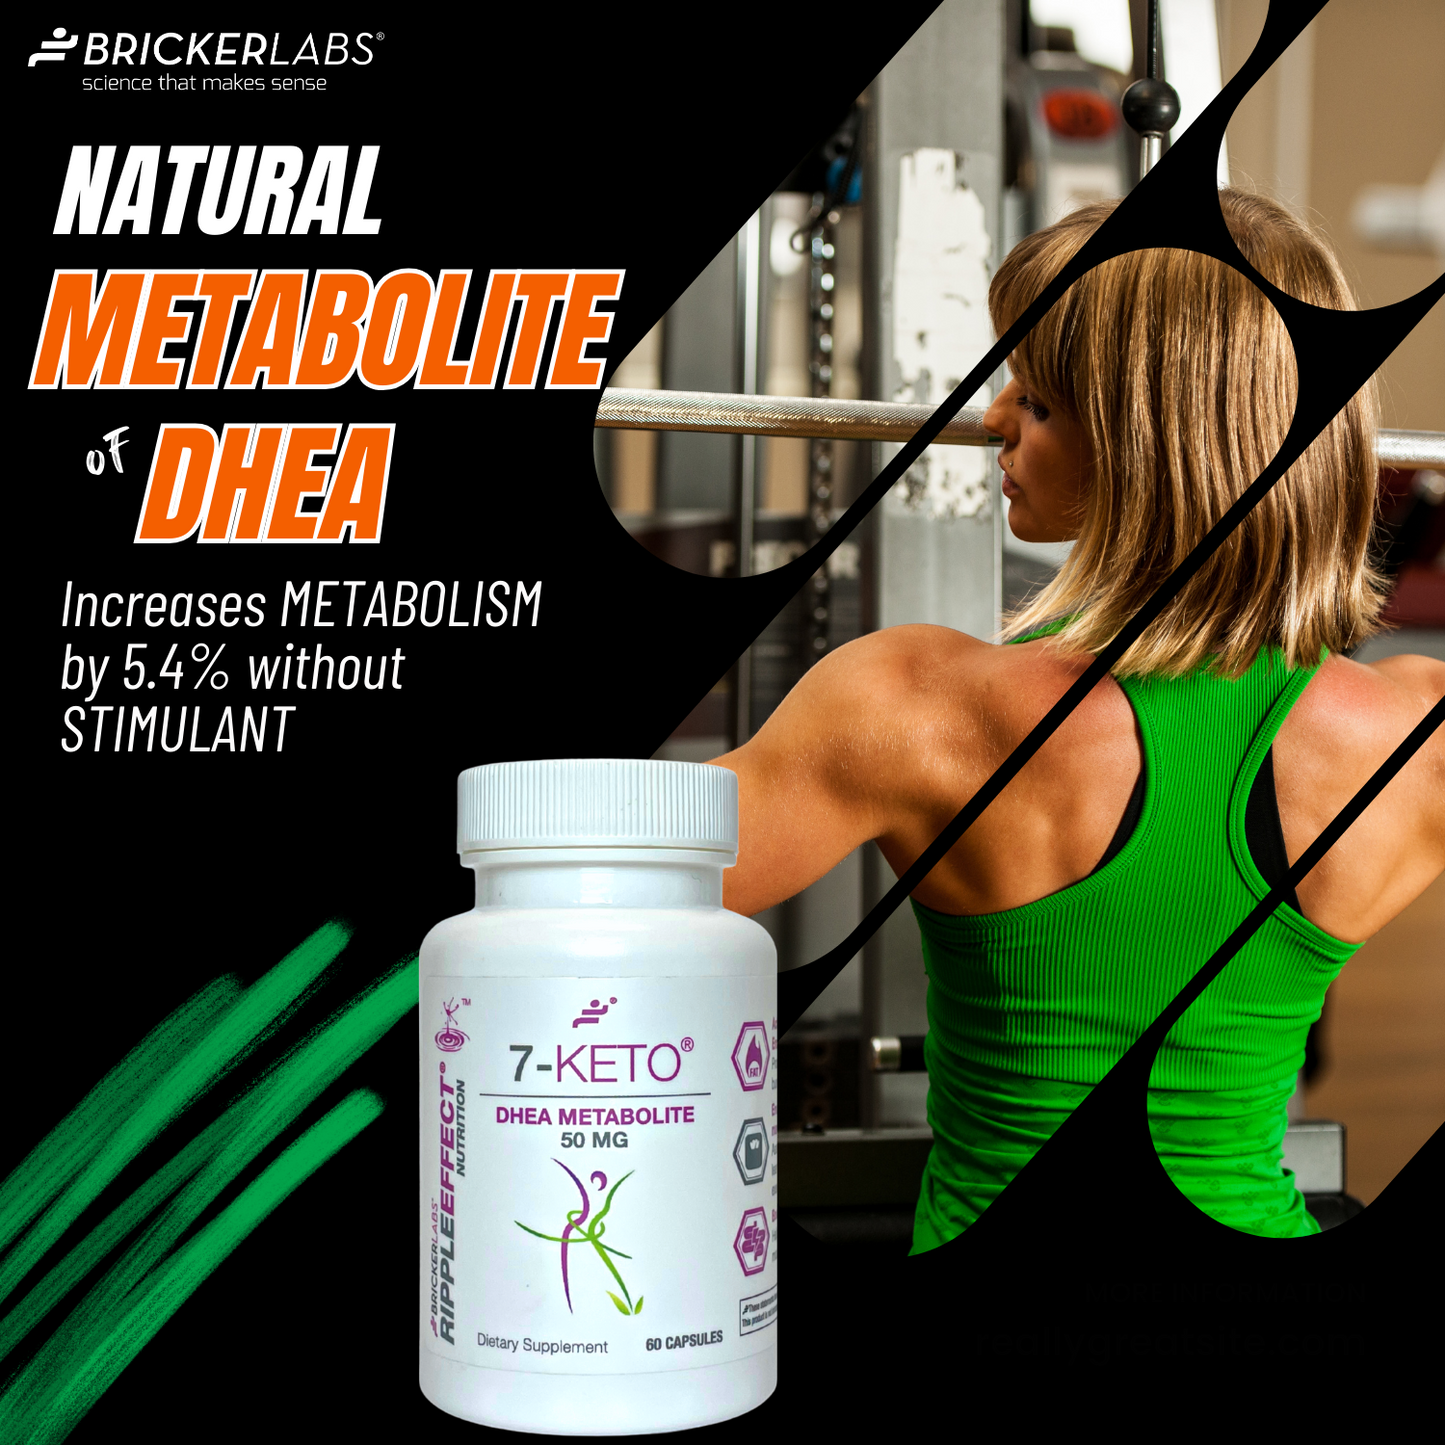 7-KETO DHEA METABOLITE 50mg weight management supplement